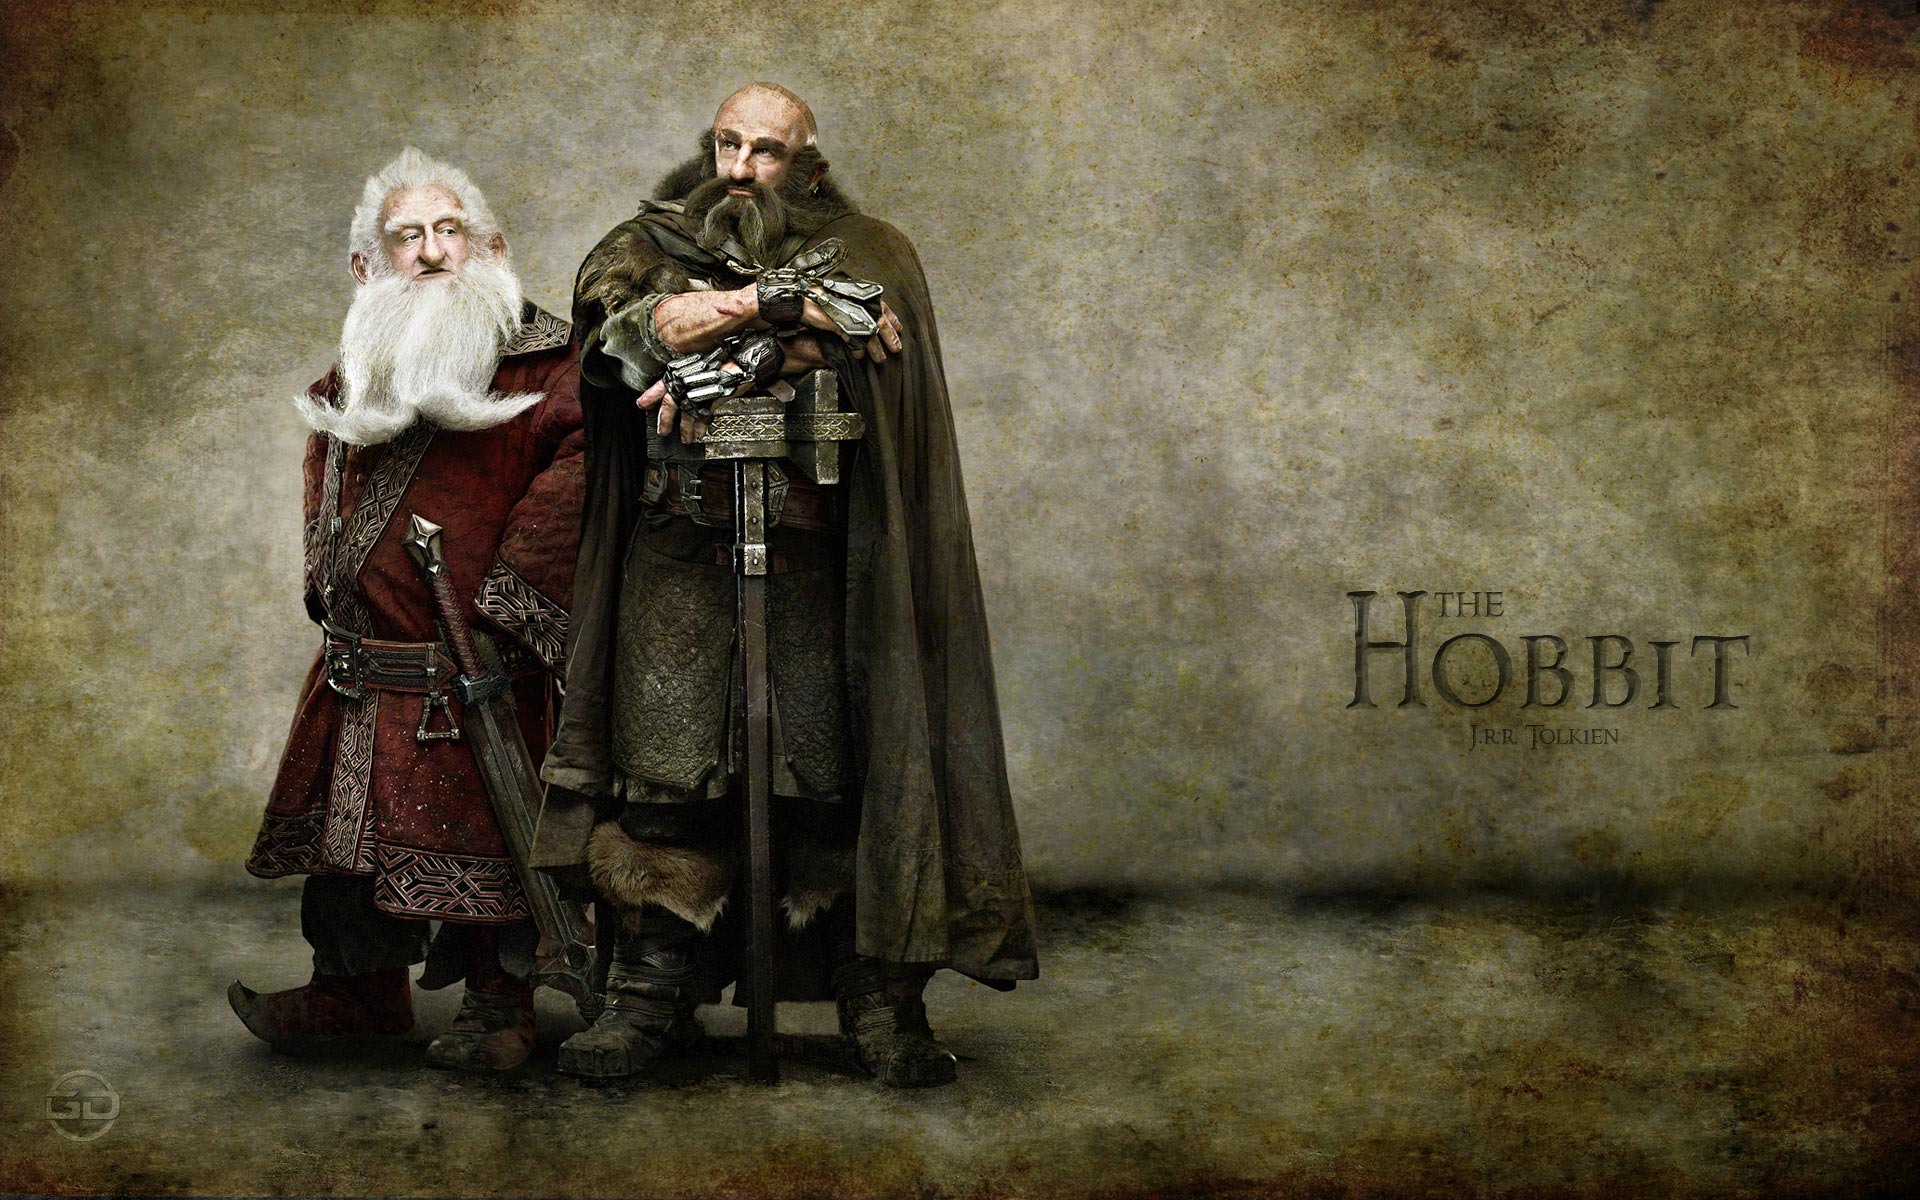 The Hobbit: An Unexpected Journey HD Wallpapers #4 - 1920x1200